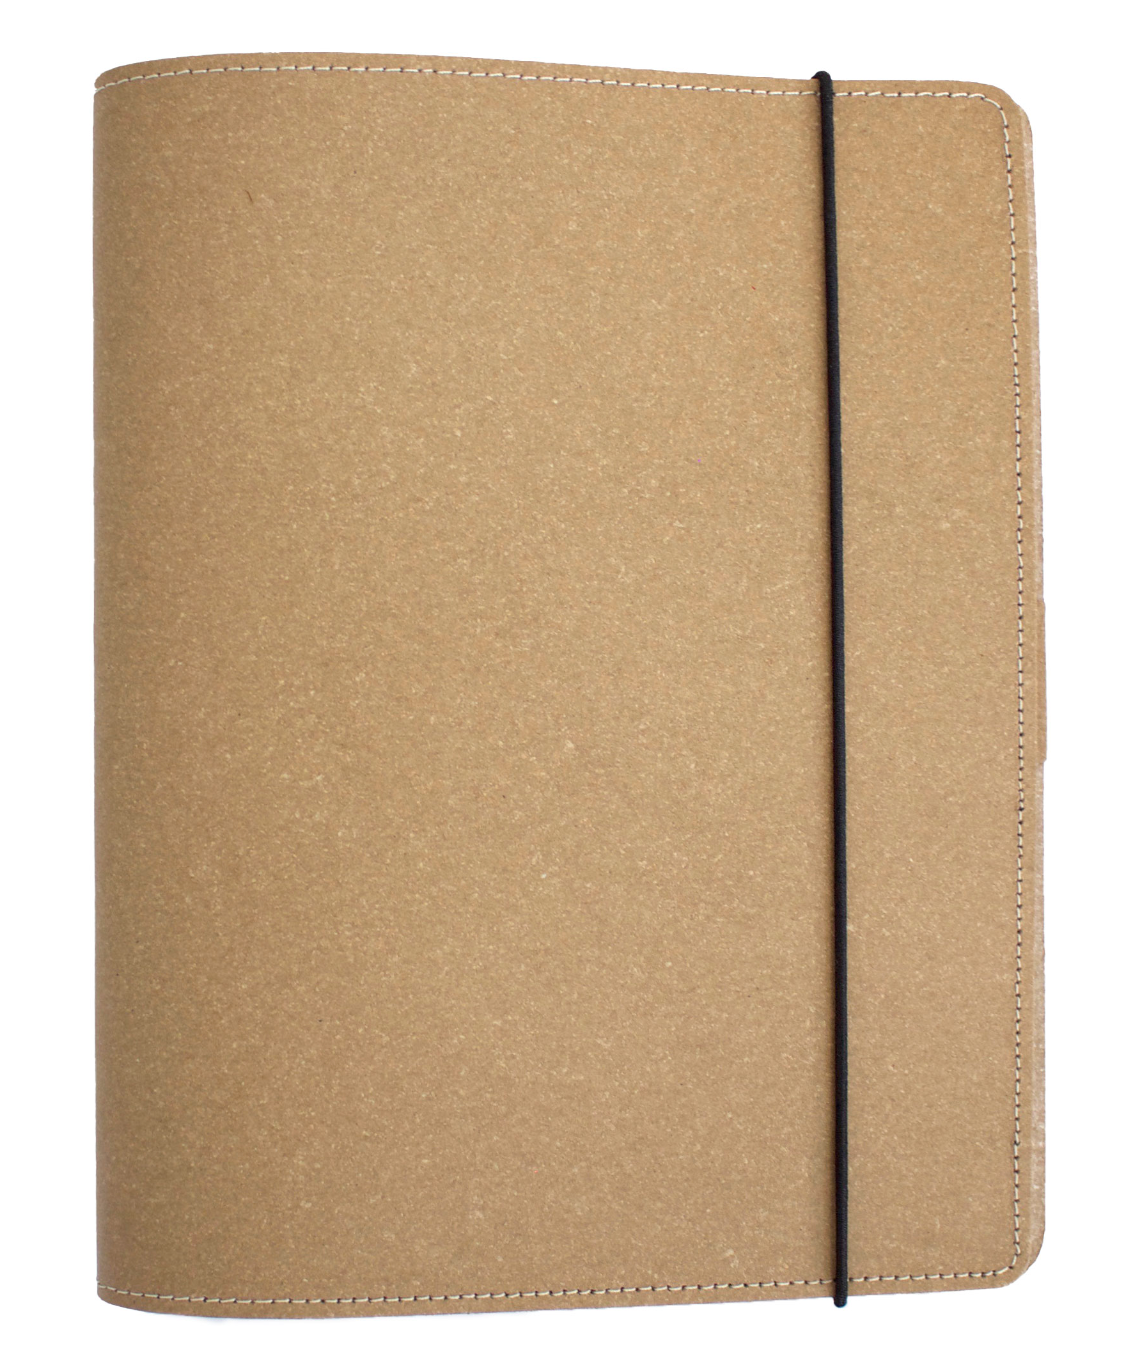 Coran & Blair A5 Leather Journal Beige Made of Fridays